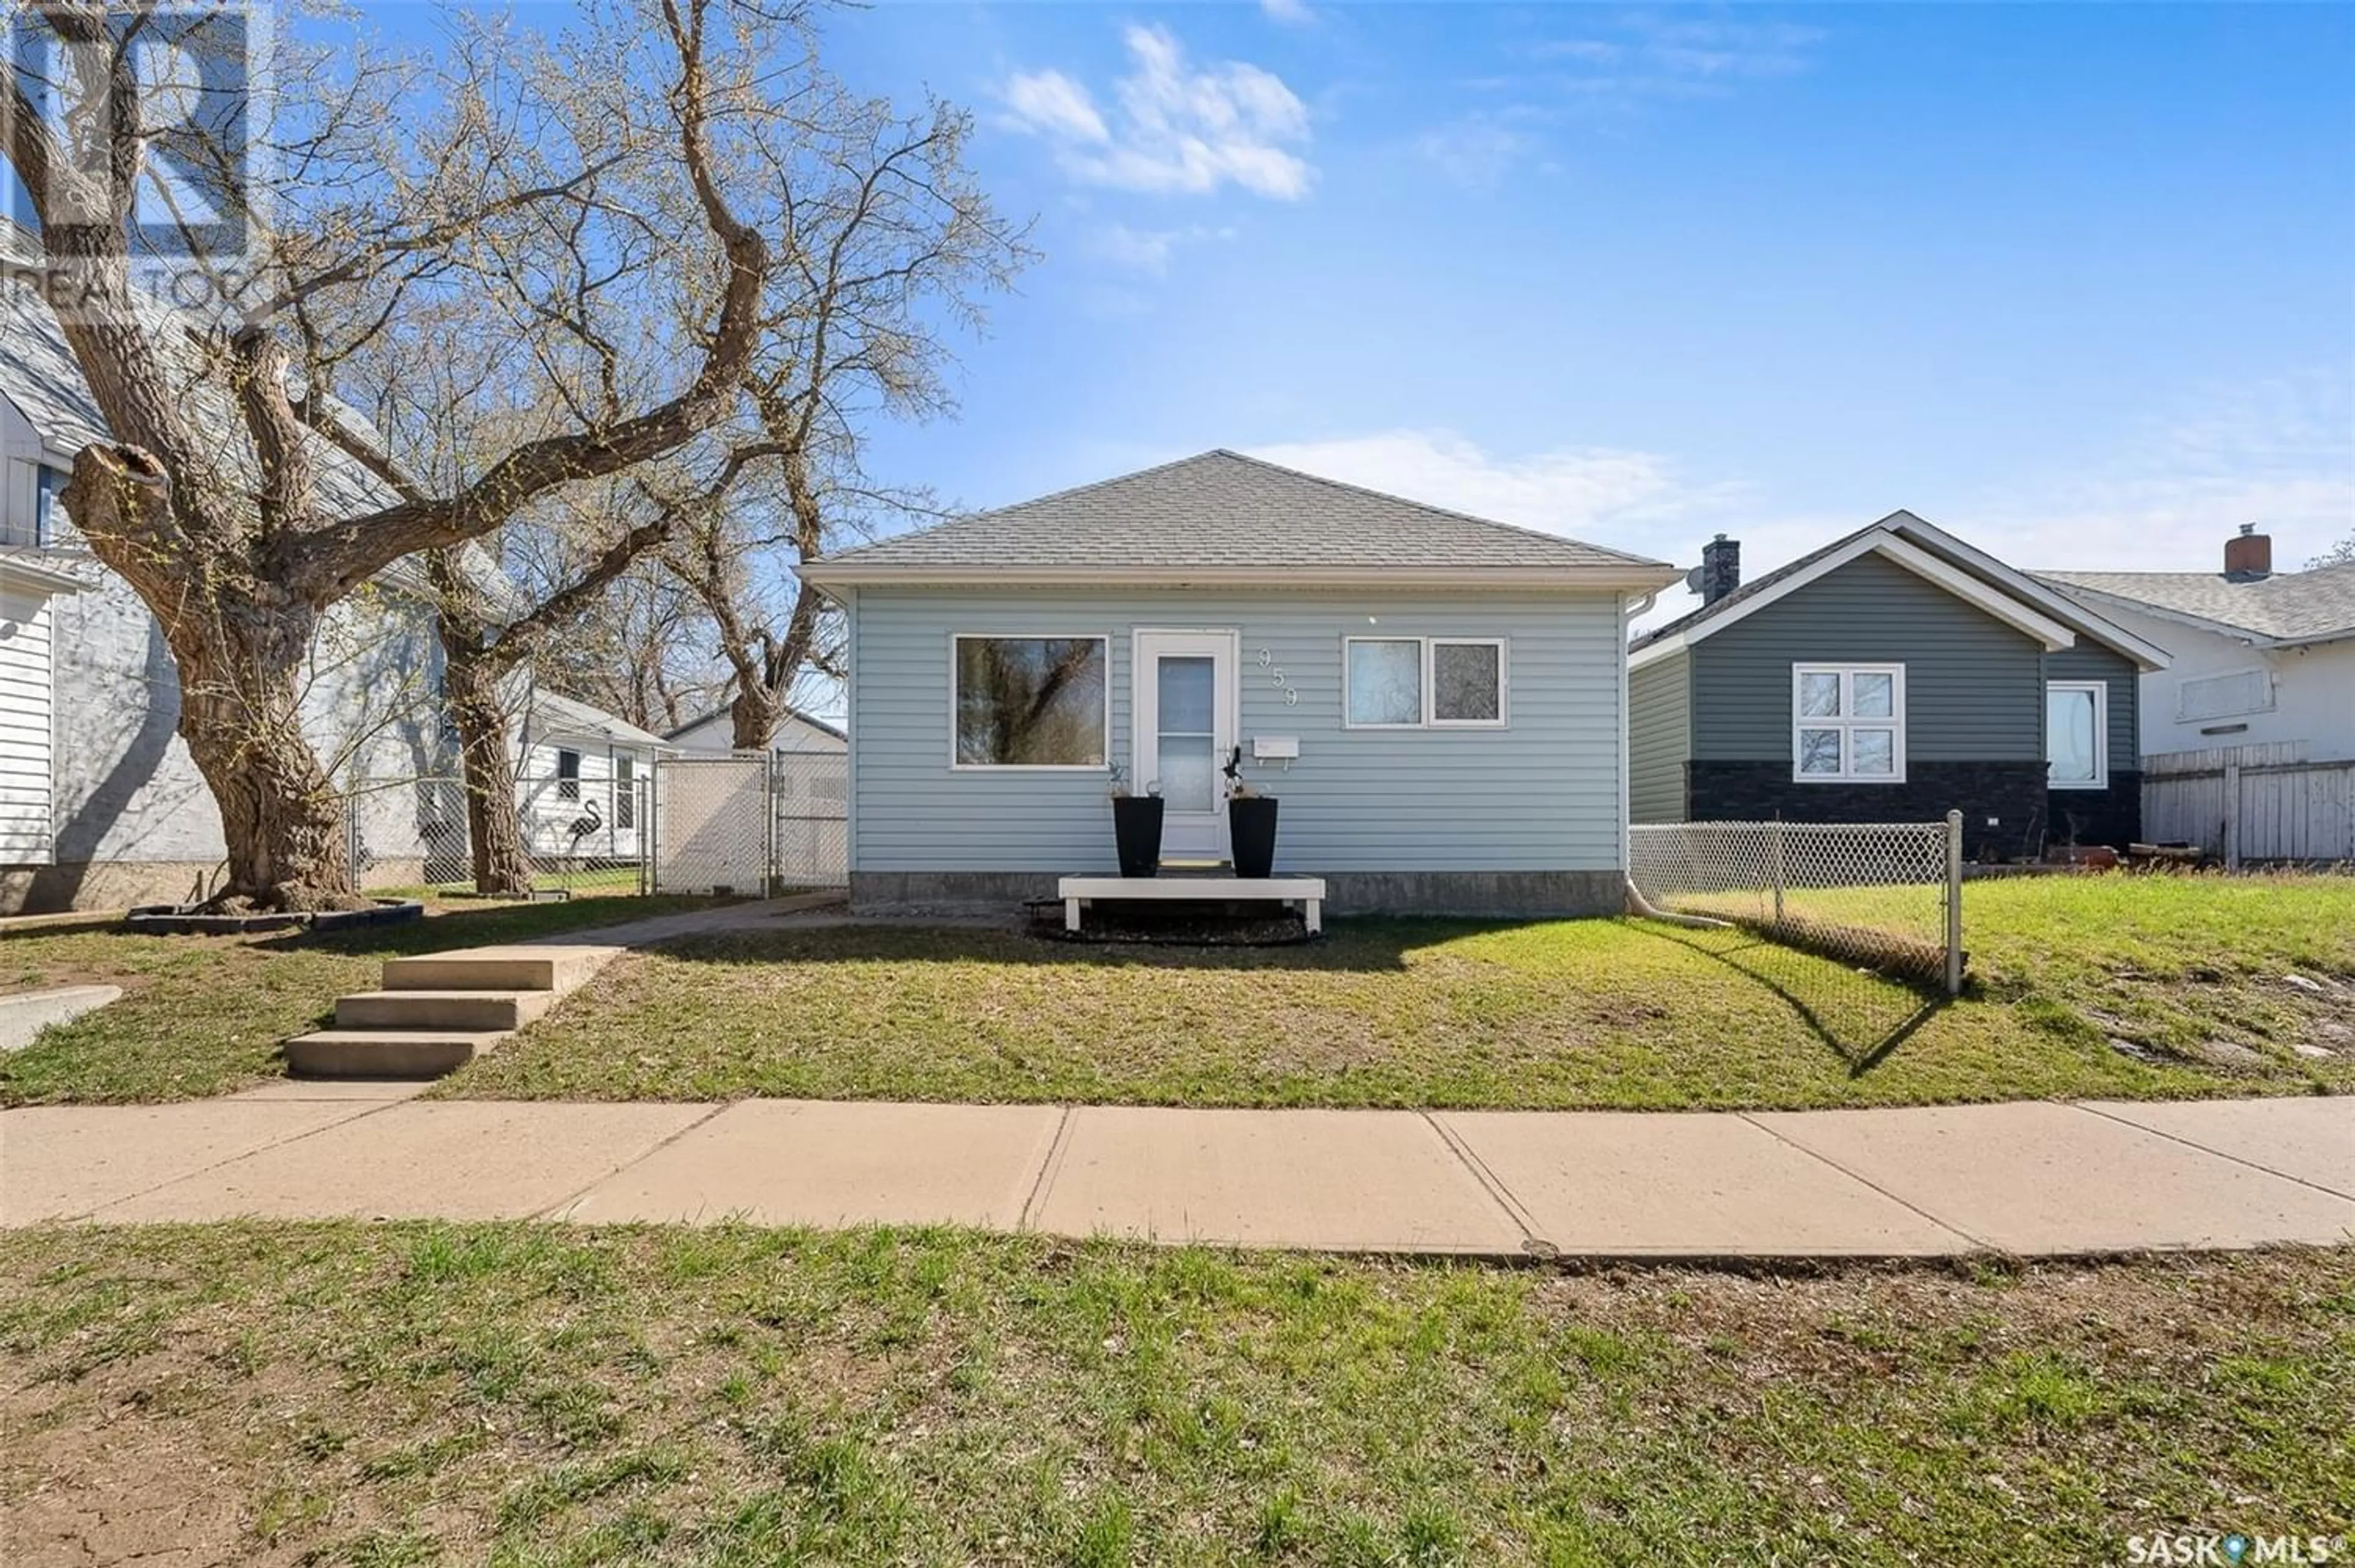 Frontside or backside of a home for 959 Iroquois STREET W, Moose Jaw Saskatchewan S6H5B5